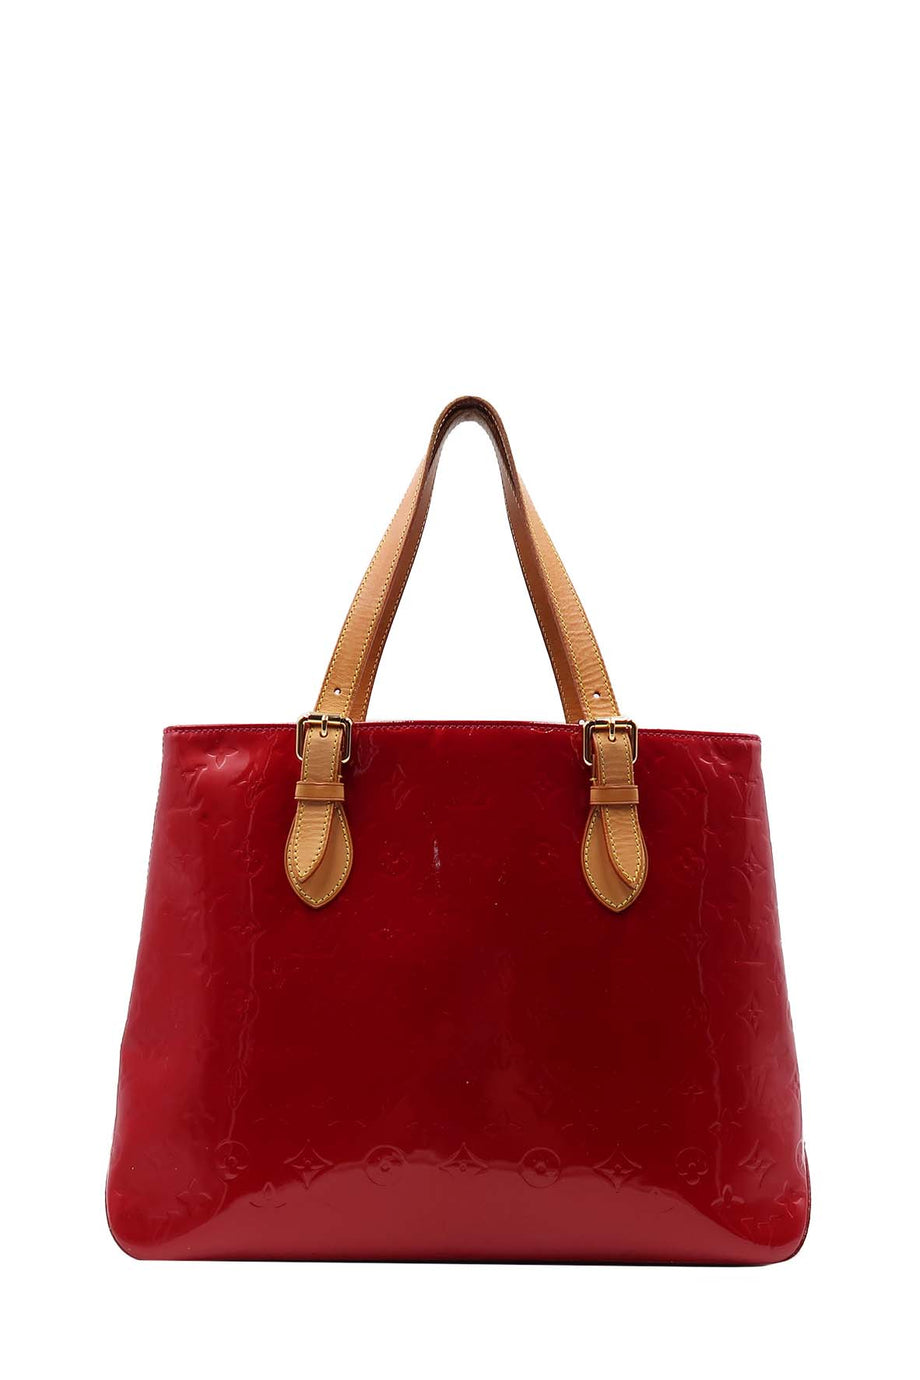 Louis Vuitton Vernis Brentwood Tote